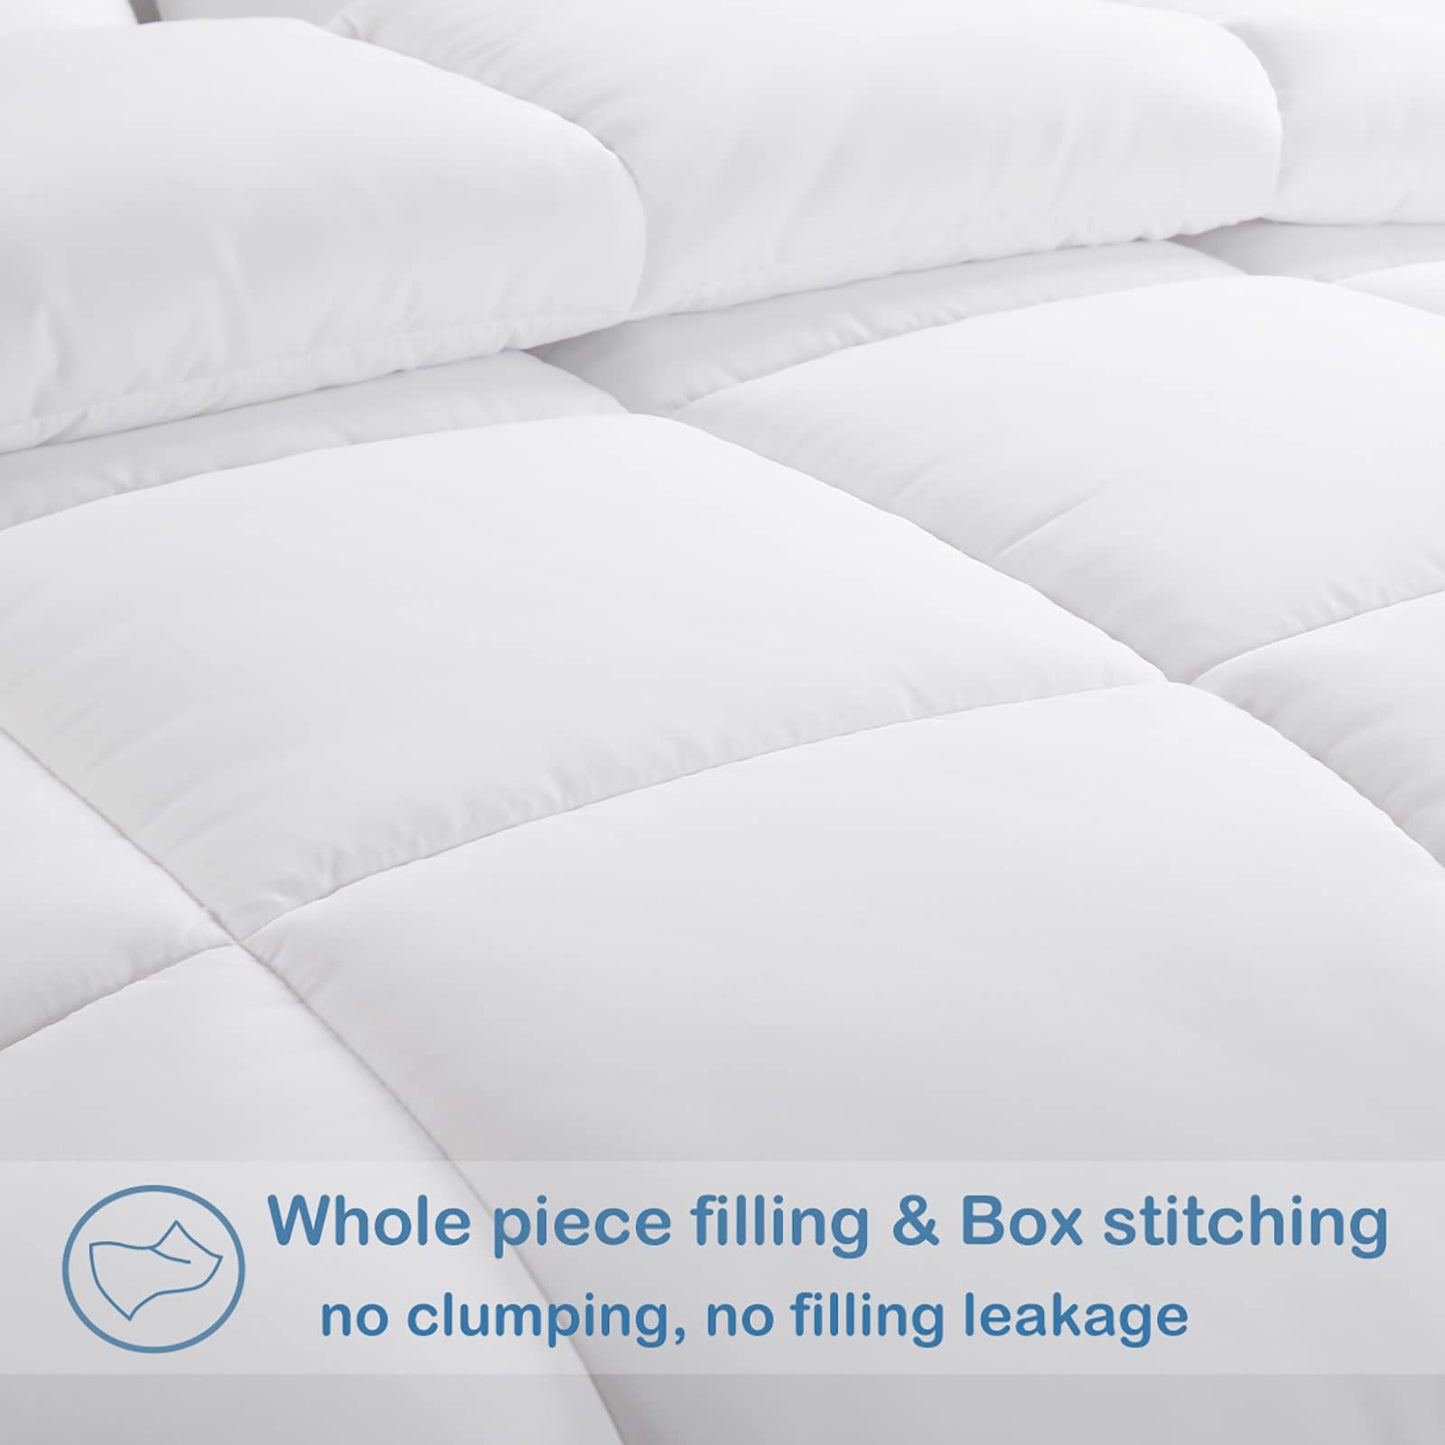 EASELAND All Season King Size Soft Quilted Down Alternative Comforter Reversible Duvet Insert with Corner Tabs,Winter Summer Warm Fluffy,White,90x102 inches